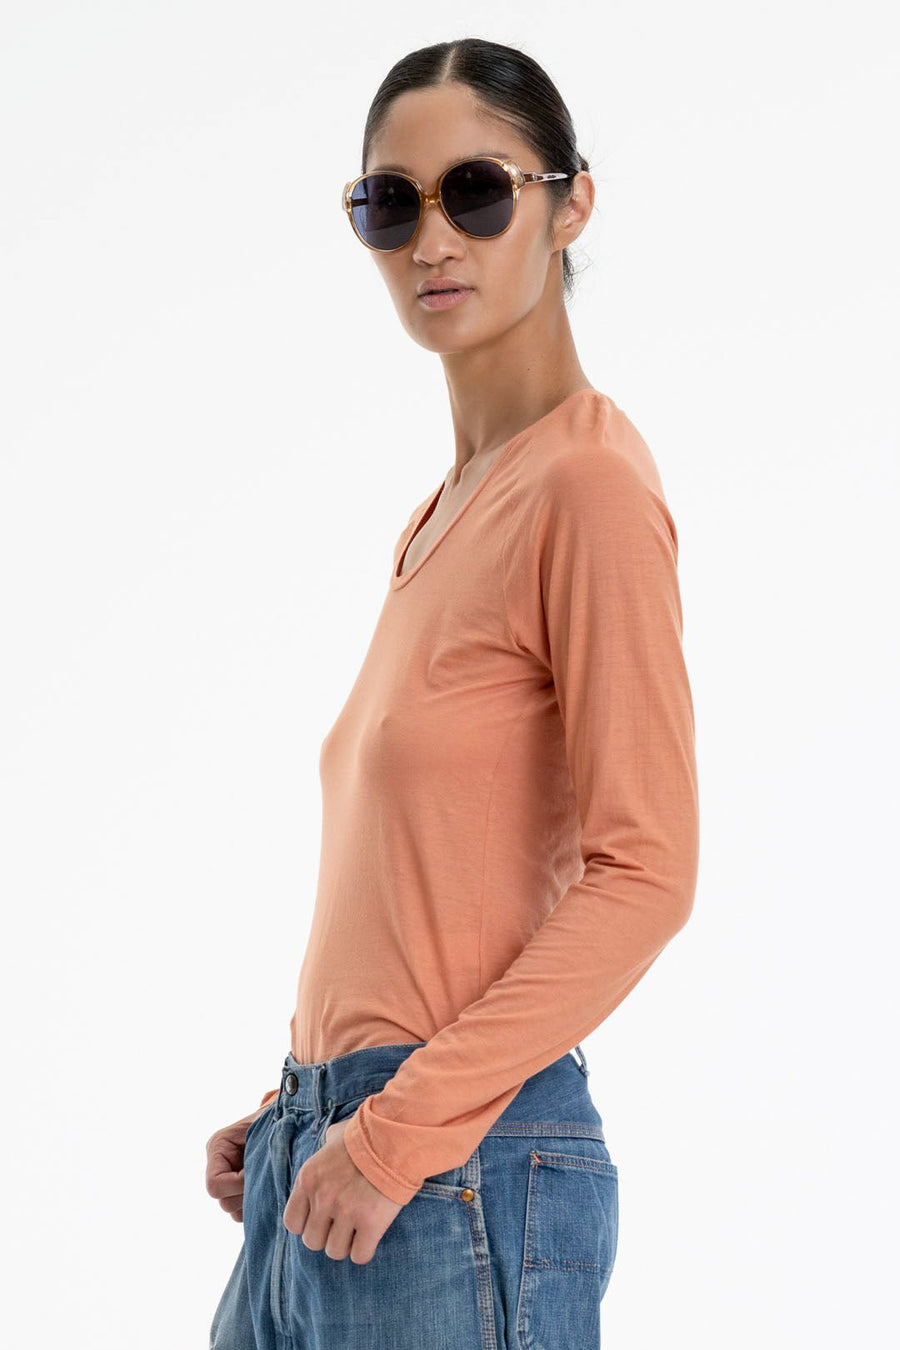 P.C.H. LONG SLEEVE SCOOP NECK TEE, MELON - Burning Torch Online Boutique